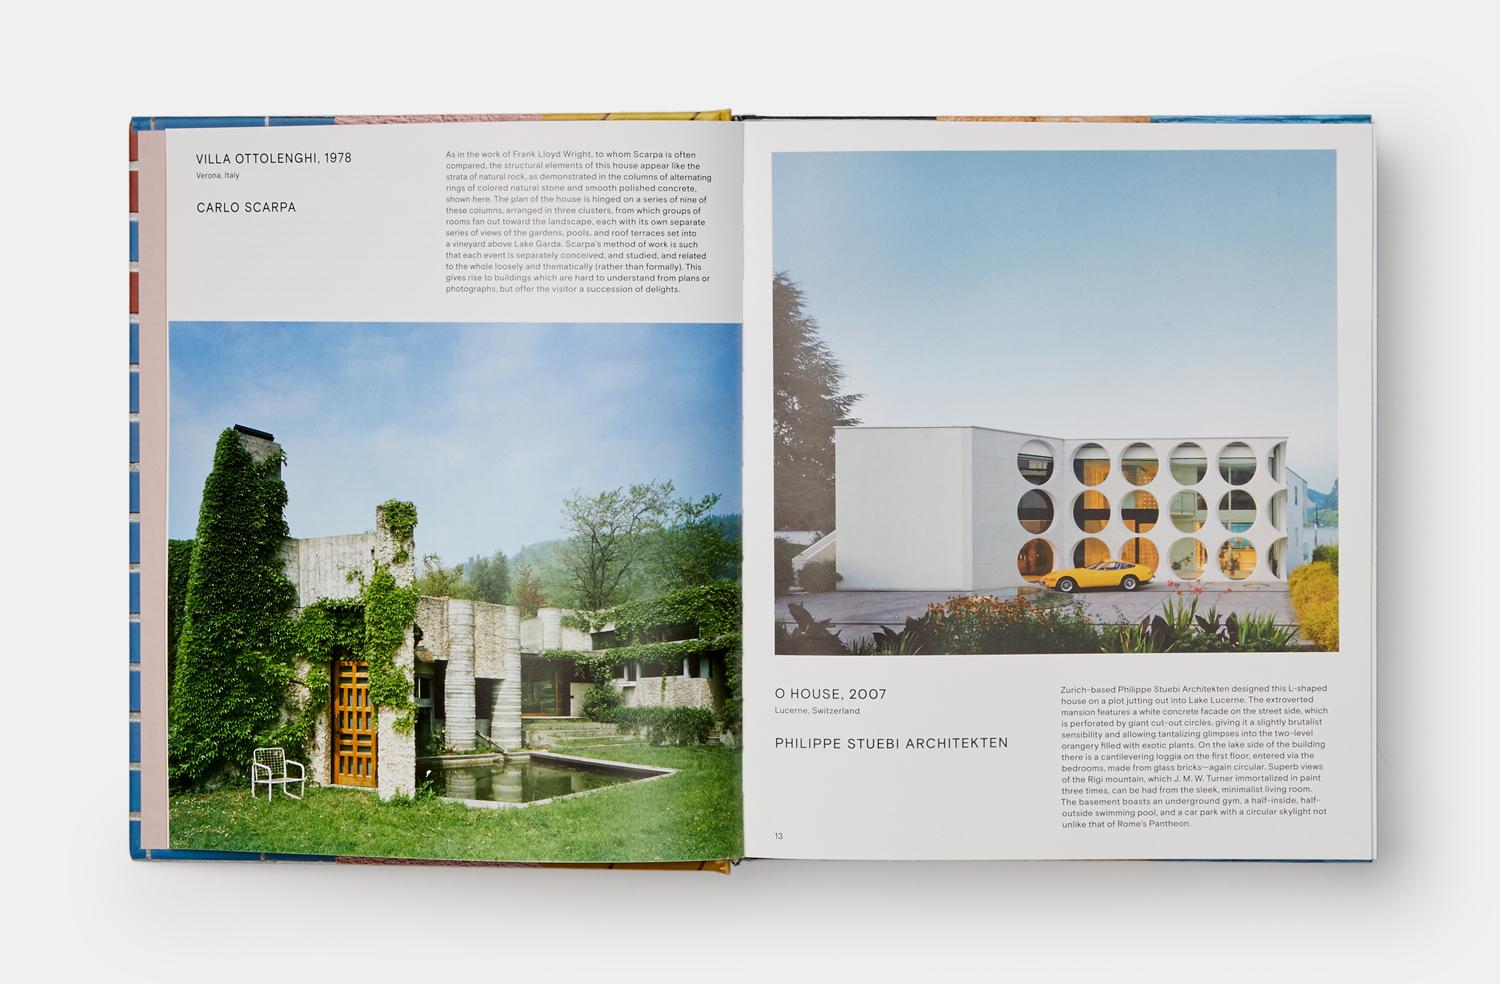 Explore 400 of the world's most innovative and influential architect-designed houses created since the early 20th century throughout history, houses have presented architects the world over with infinite opportunities to experiment with new methods